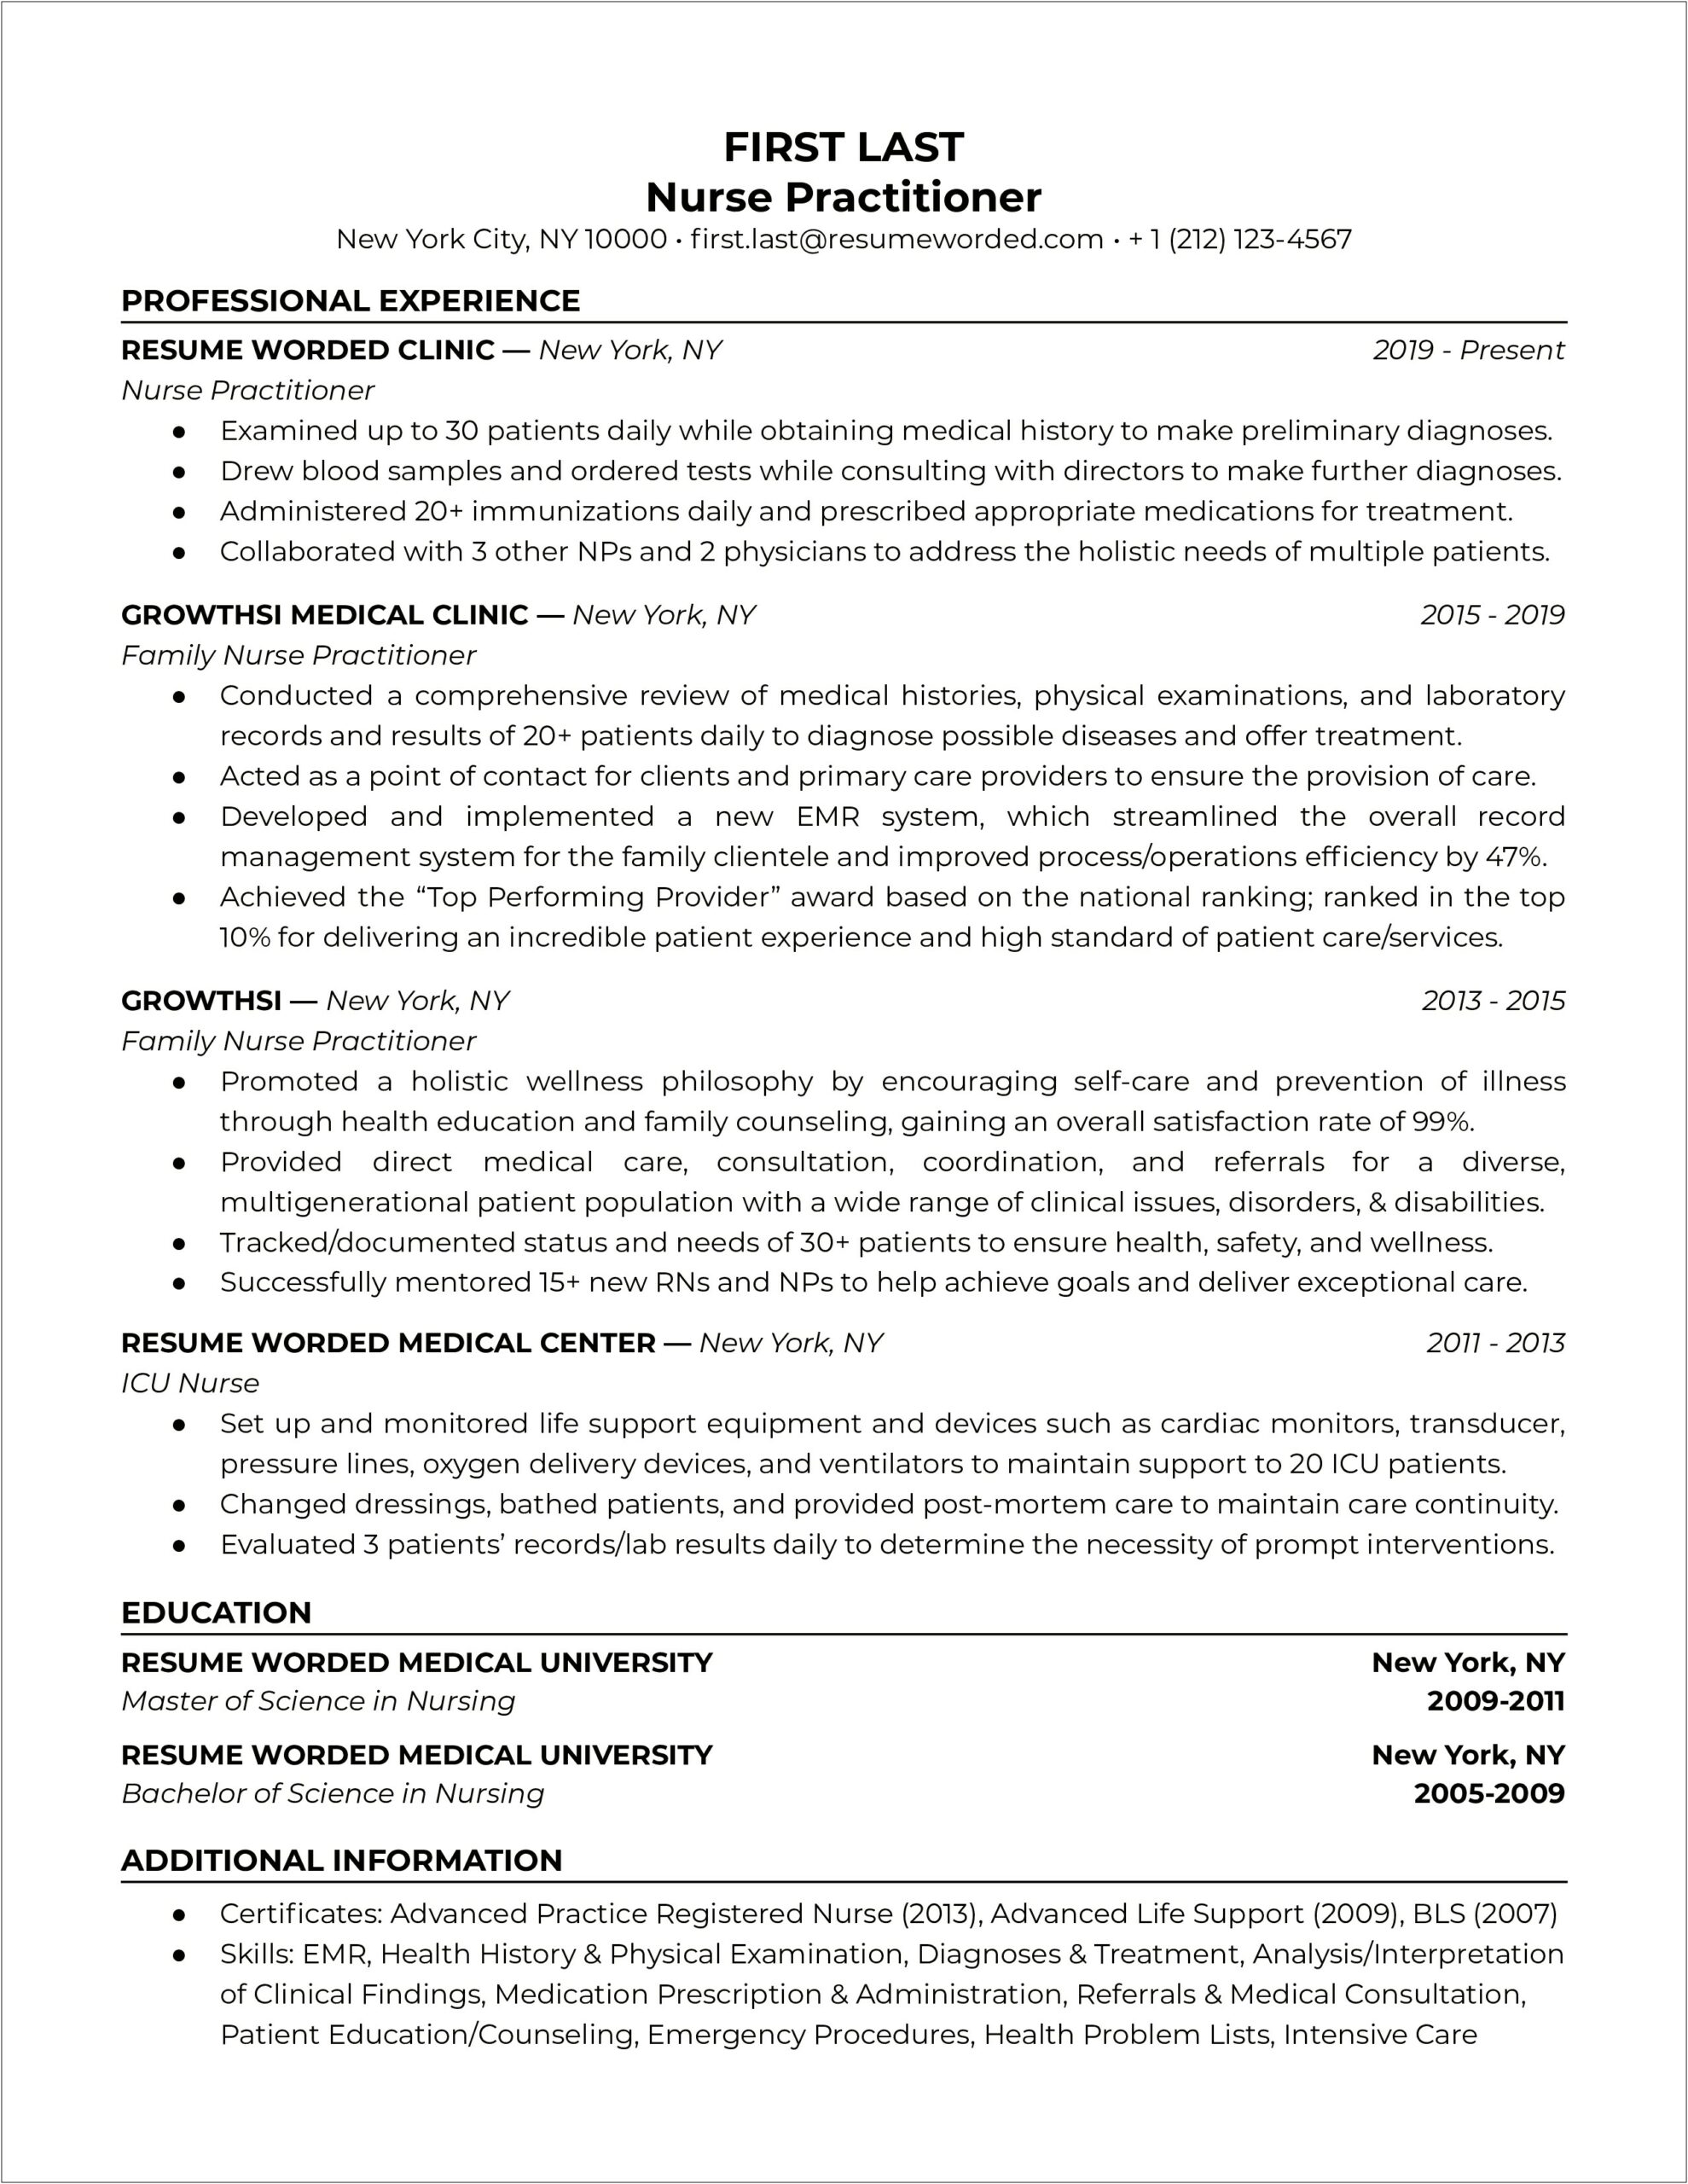 Summary Of Qualifications For Nurse Practitioner Resume